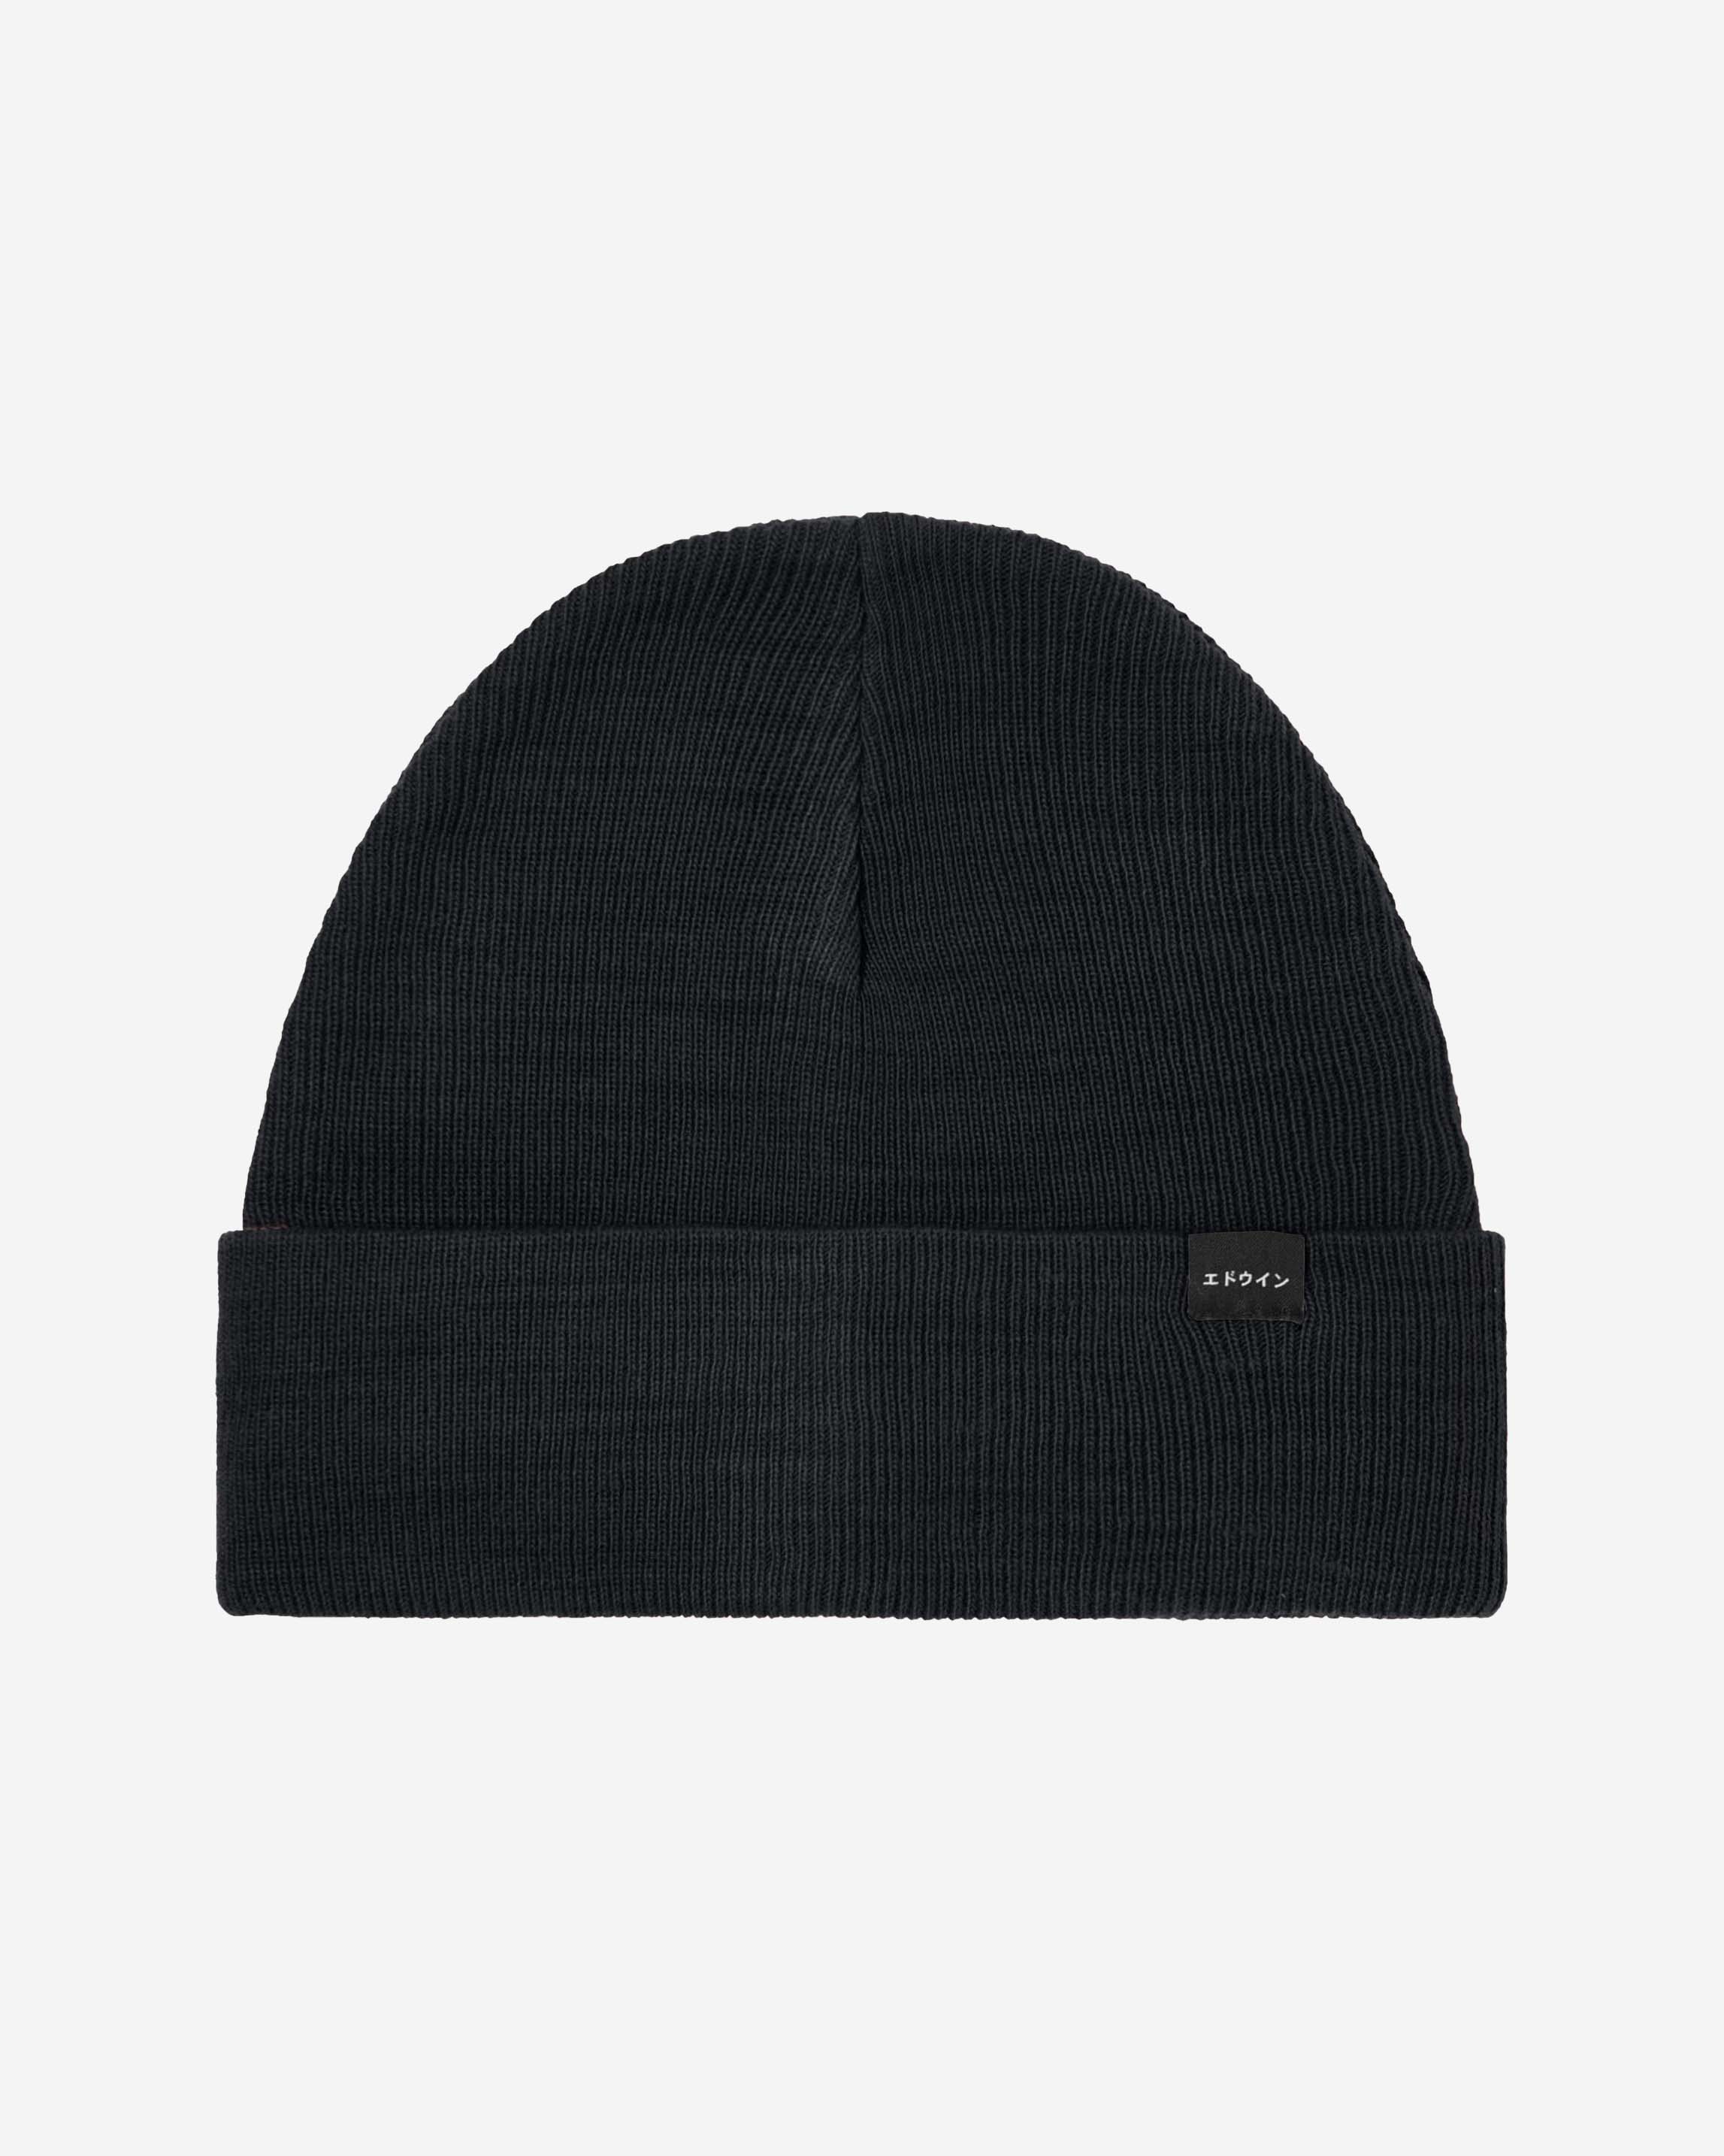 The EDWIN Watch Cap Beanie is a 100% Jersey Acrylic beanie in a yellow colourway Made in Marocco Garment Washed Jersey Knit Double Layer Turn-up part Jersey Knit, 100% Acrylic, 5GG